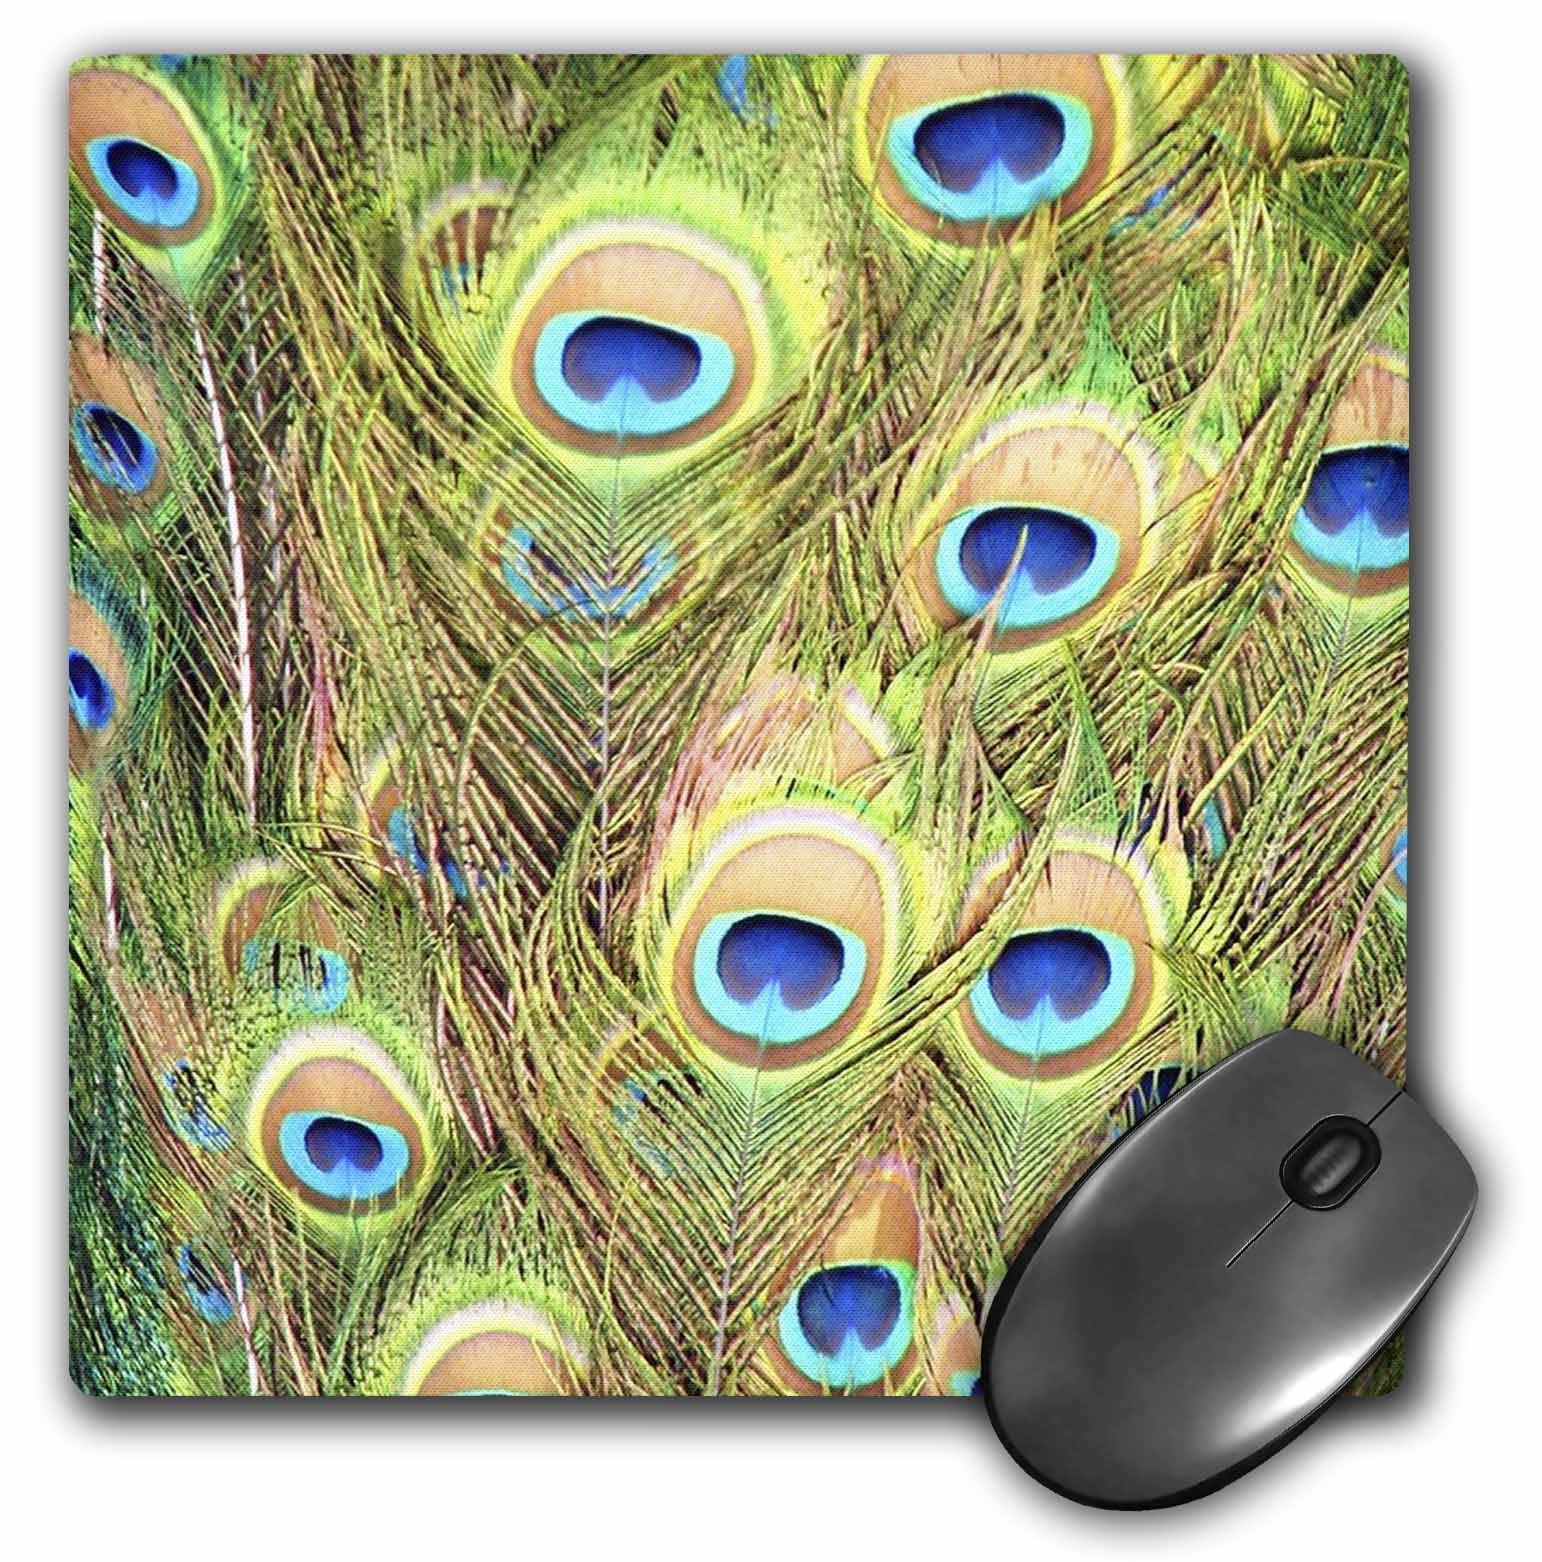 3dRose Macro Of Real Peacock Feathers, Mouse Pad, 8 by 8 inches ...